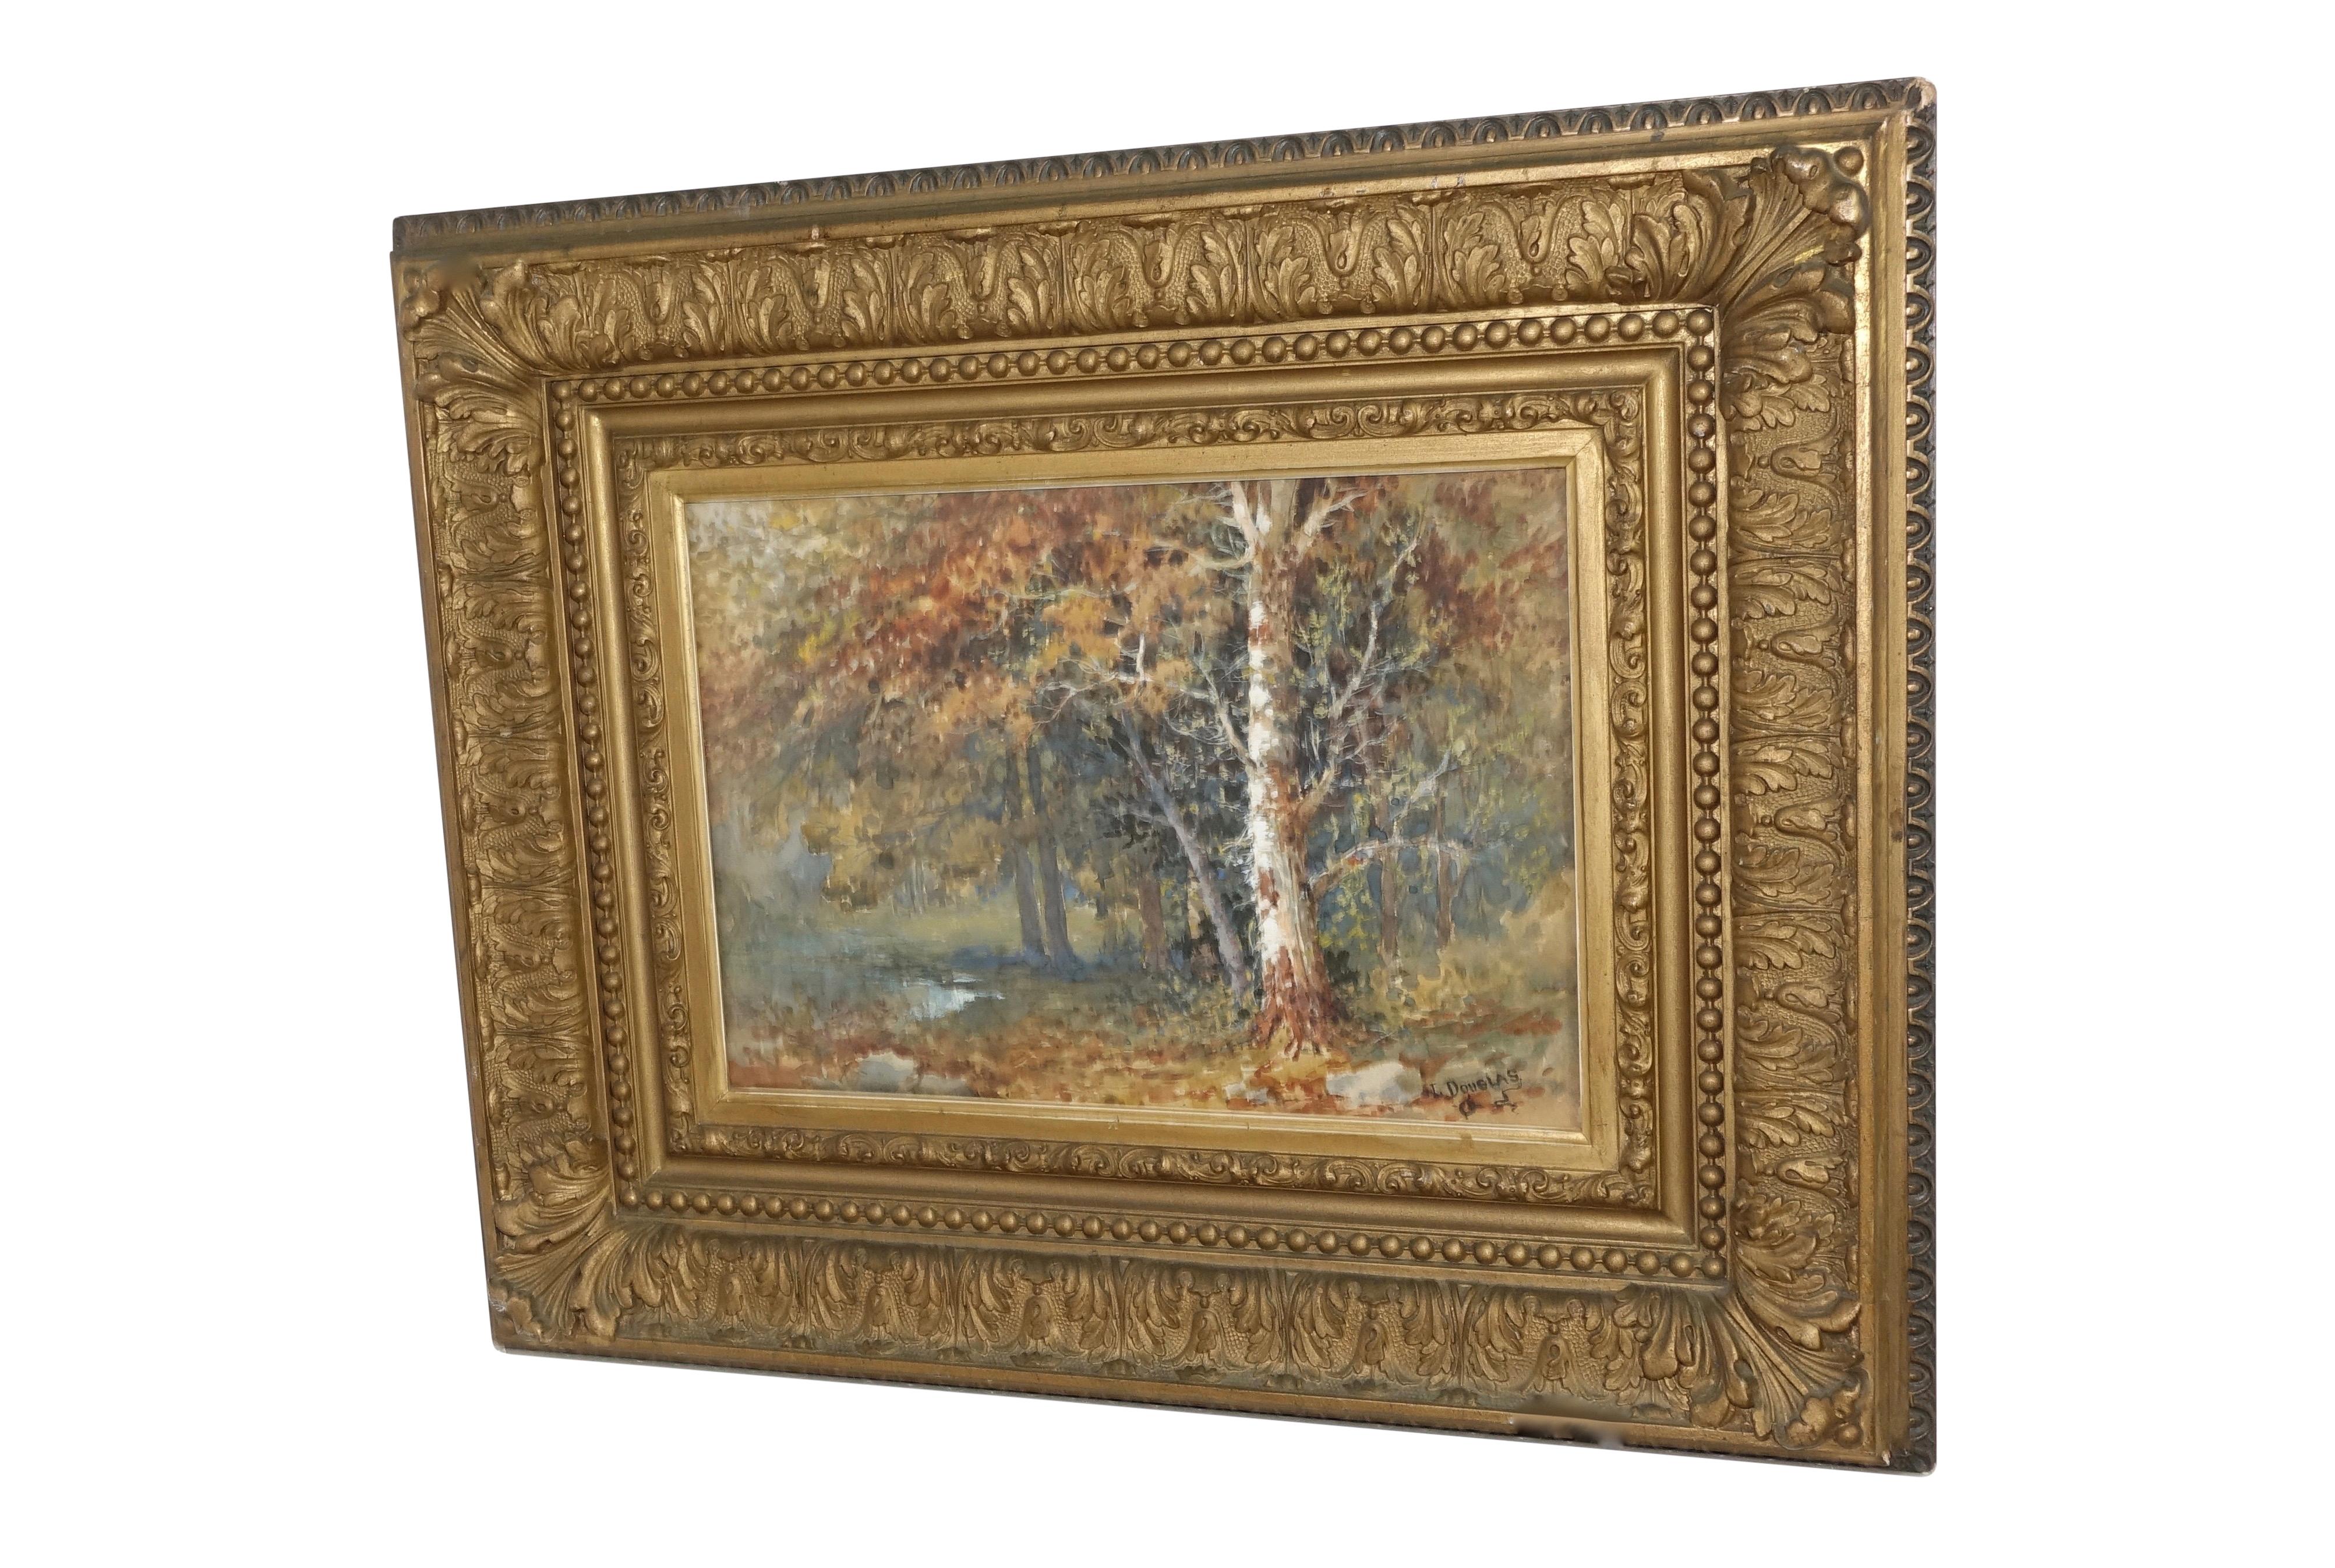 Beautifully painted landscape forest scene with stream in original giltwood frame, watercolor under glass. Signed in the lower right corner L. Douglas. American, early 20th century.
Sight measures 13.5 inches wide x 9.5 inches high.
Not viewed out